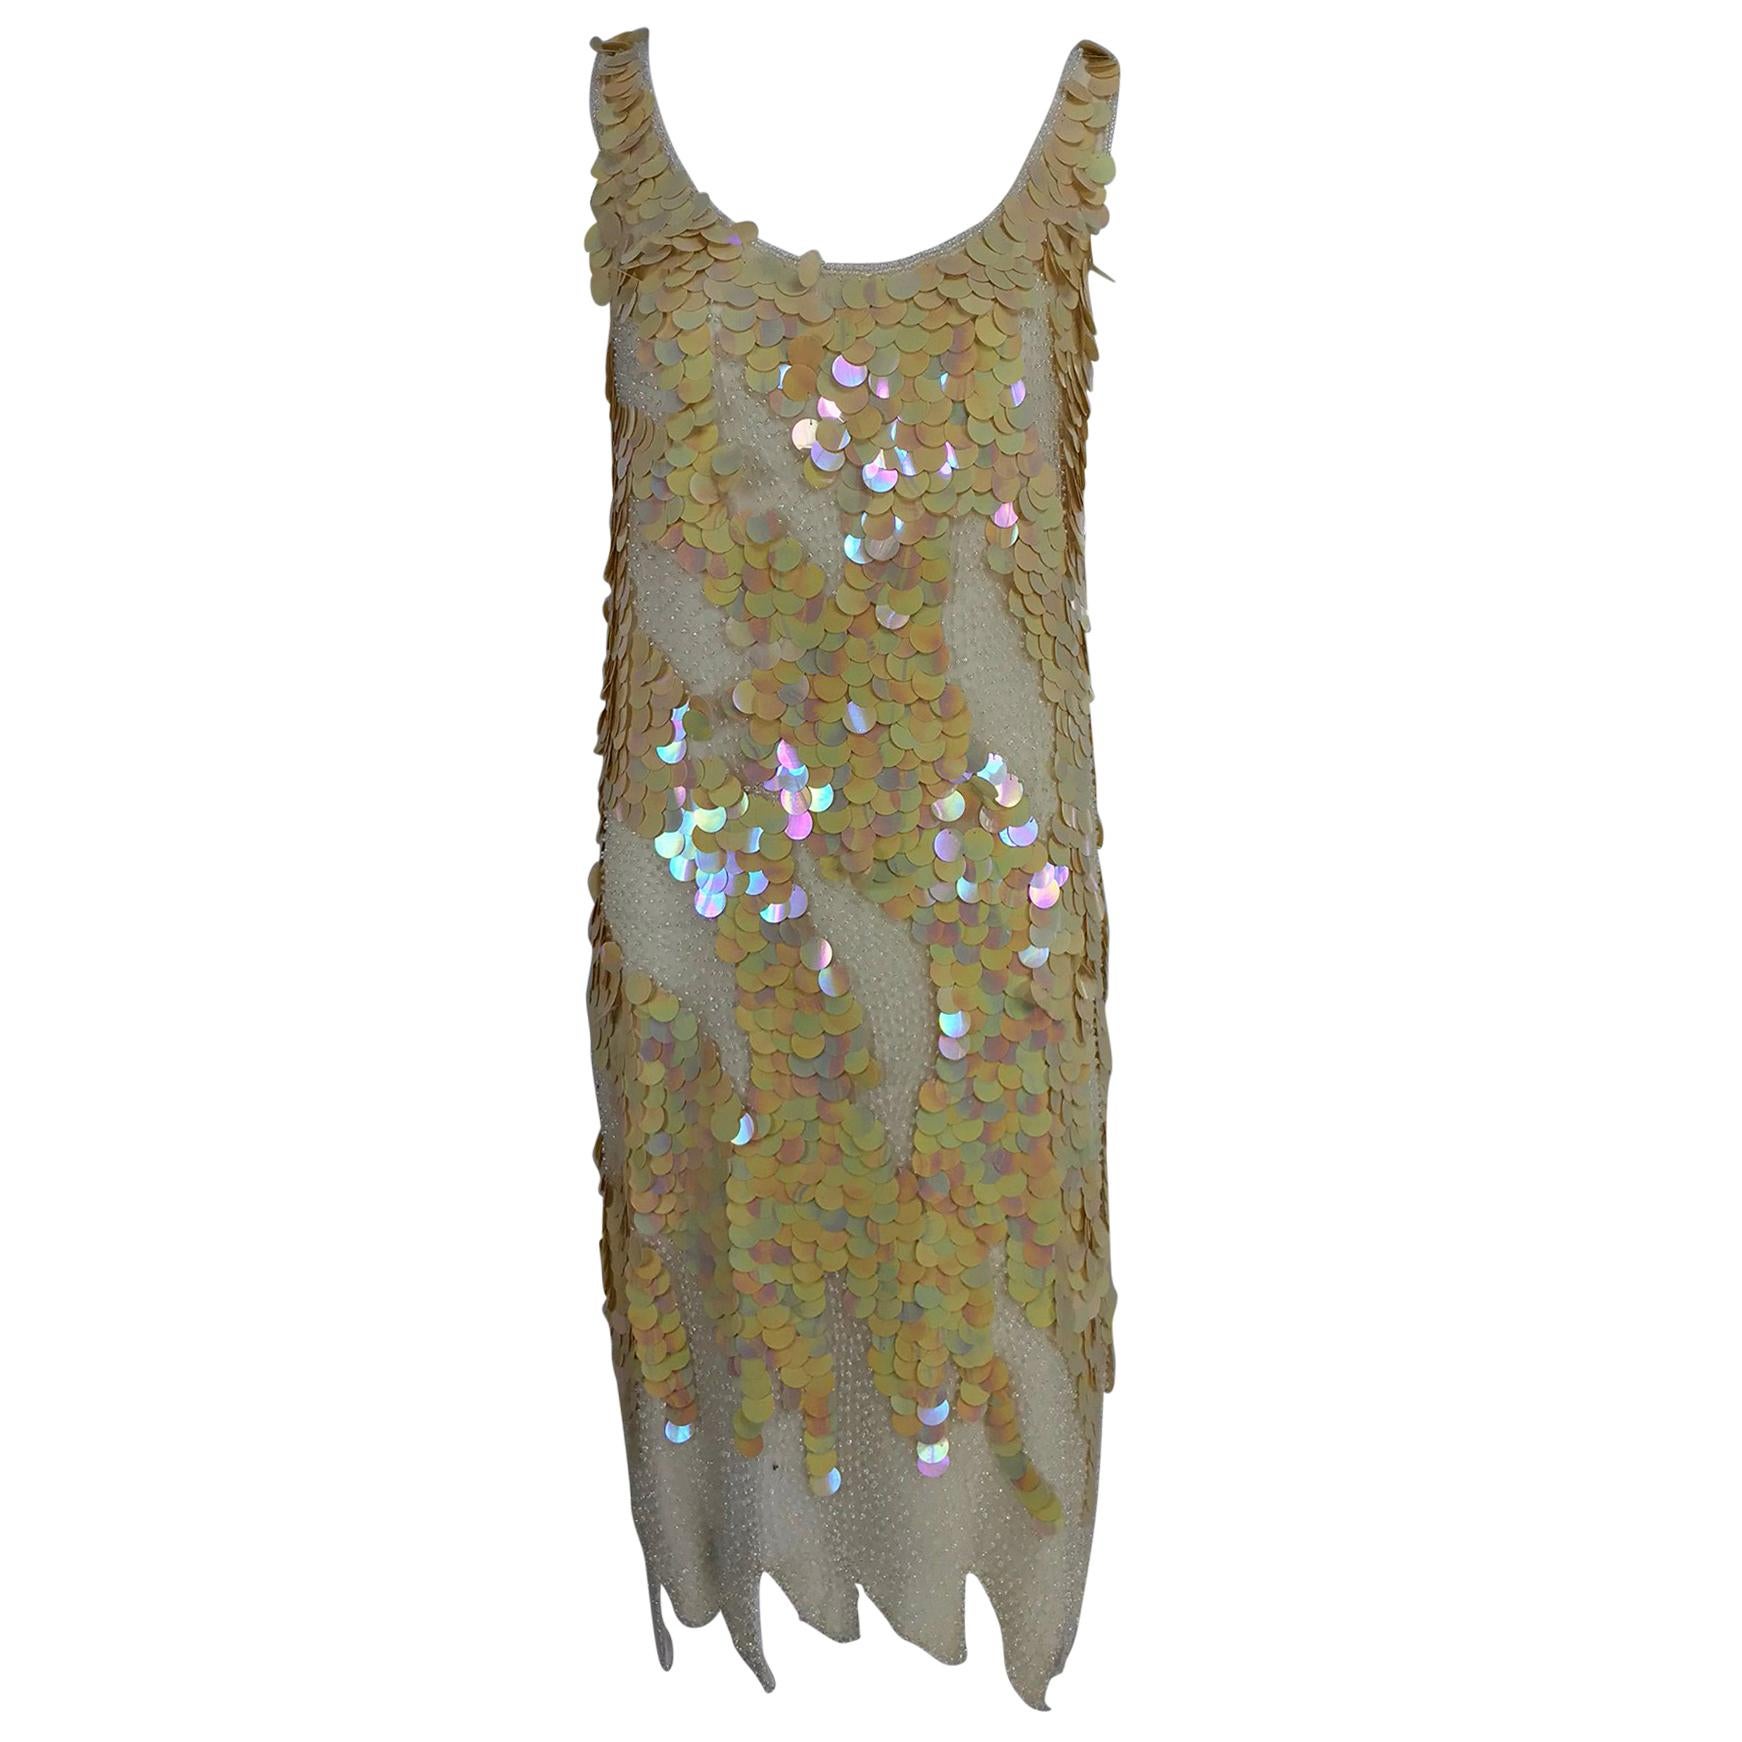 Swee Lo Beaded Iridescent Paillette 1920s flapper style dress, 1980s 